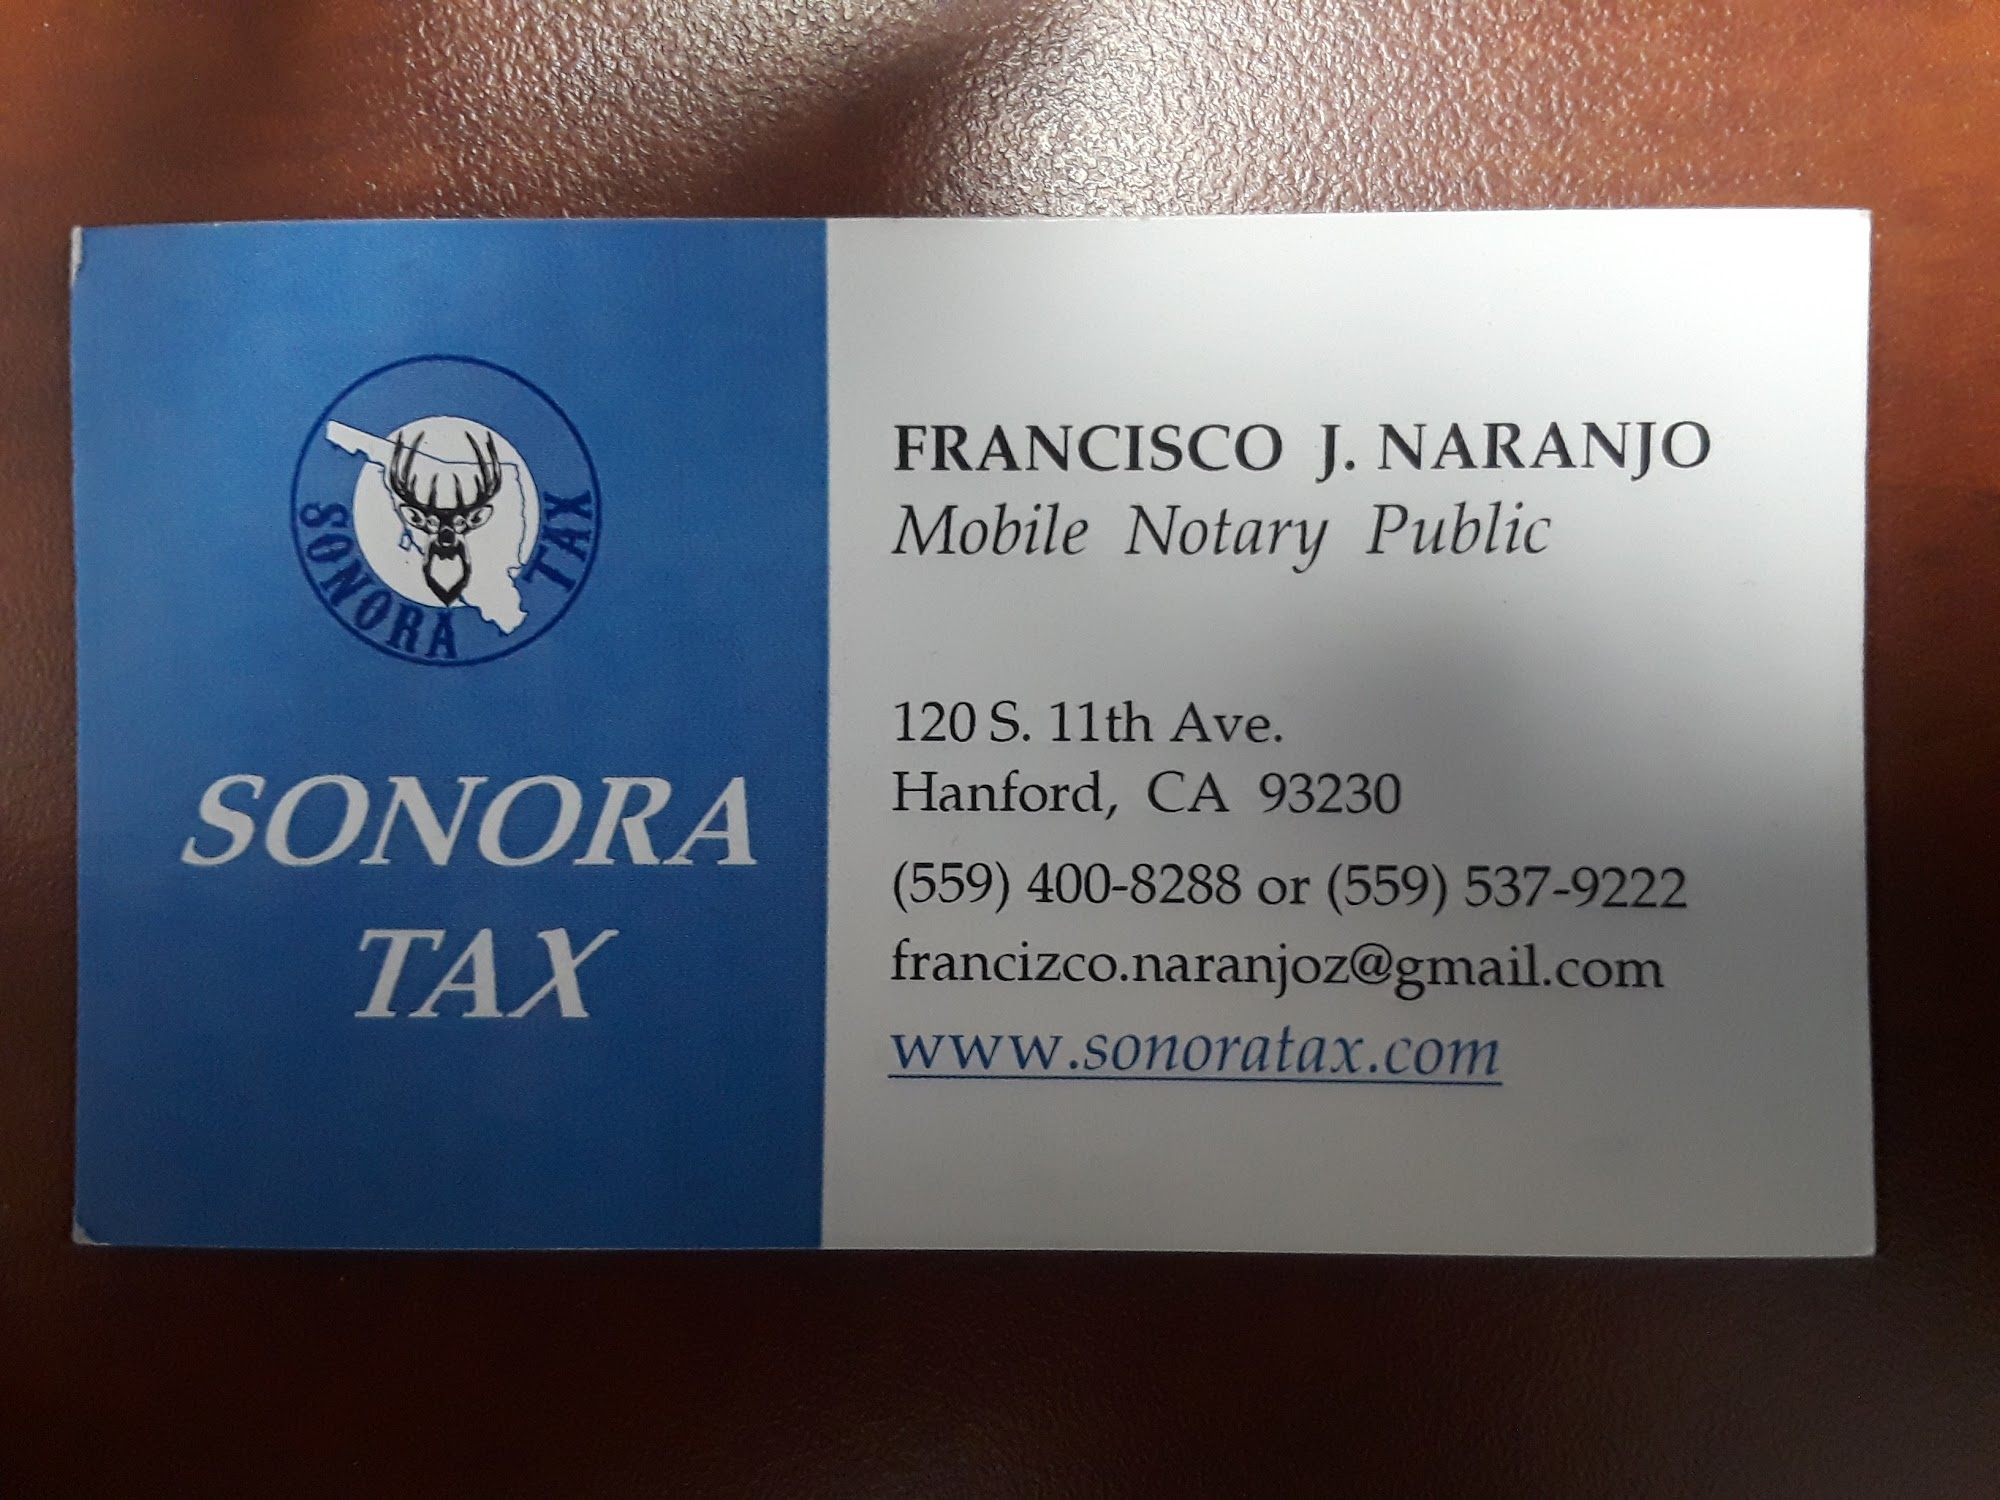 Francisco's Mobile Notary